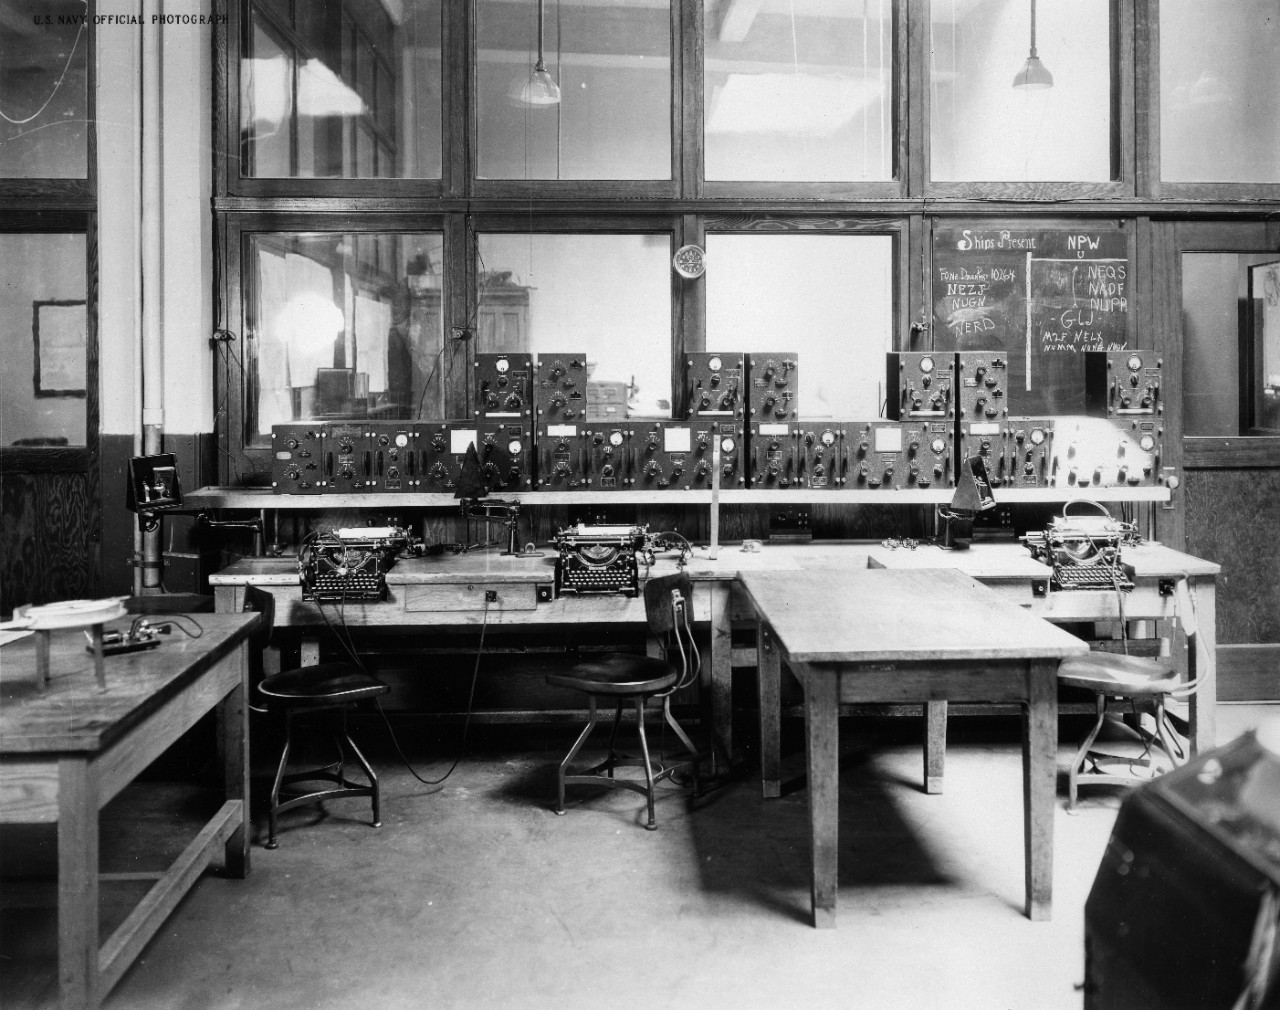 Approximately 50 photos, negatives, and cyanotypes (plus duplicates) showing the Radio Headquarters of the Twelfth Naval District, 100 Harrison Street, San Francisco, California, circa 1926-1927. Shown are: control stations, transmitters, generators, amplifiers, receivers, antenna system, distribution panel, high speed recorder, work shop, batteries, Bellevue experimental receiver, compass tracking section. Some prints and negatives were made from acetate negatives which were subsequently destroyed.